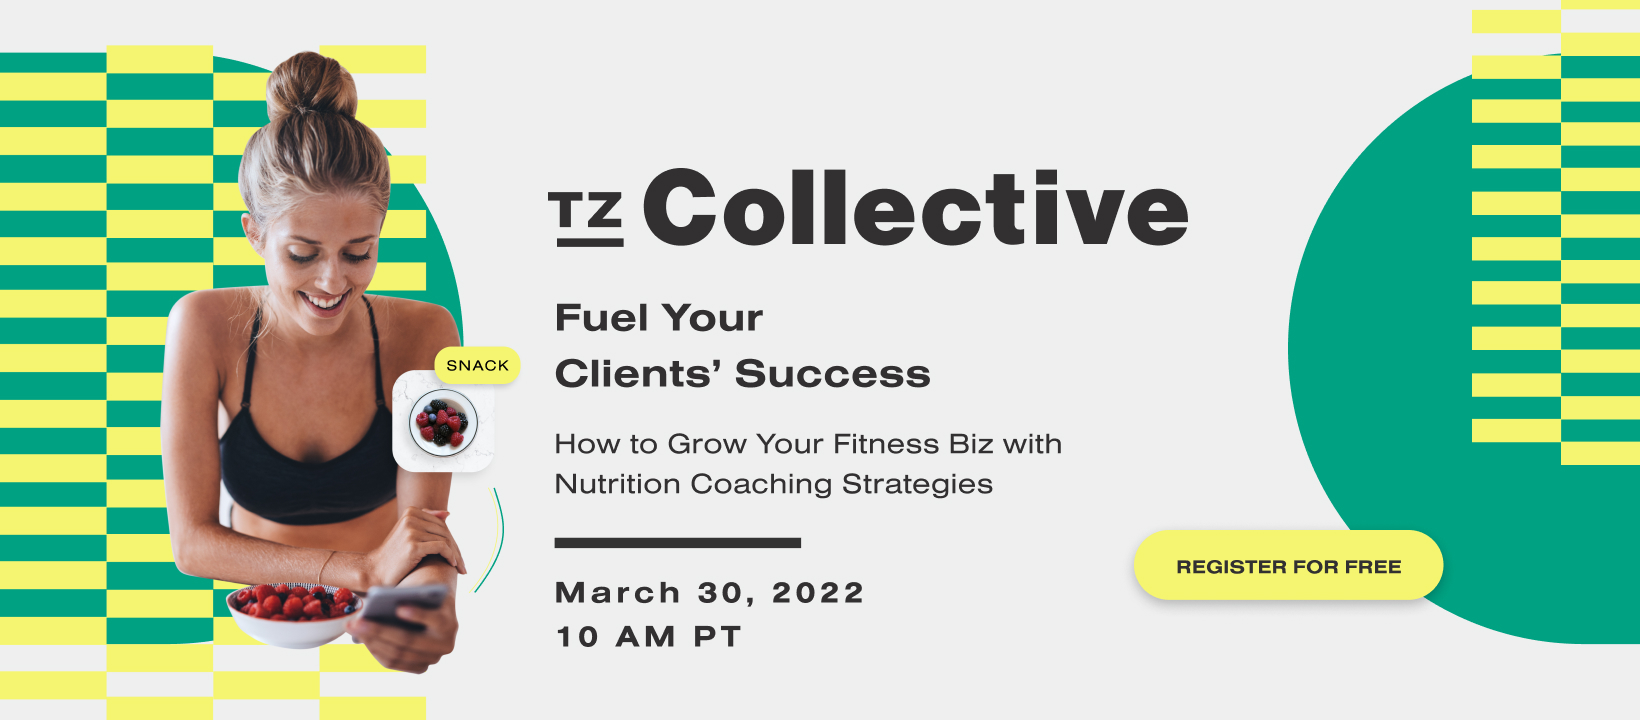 Join TZ Collective